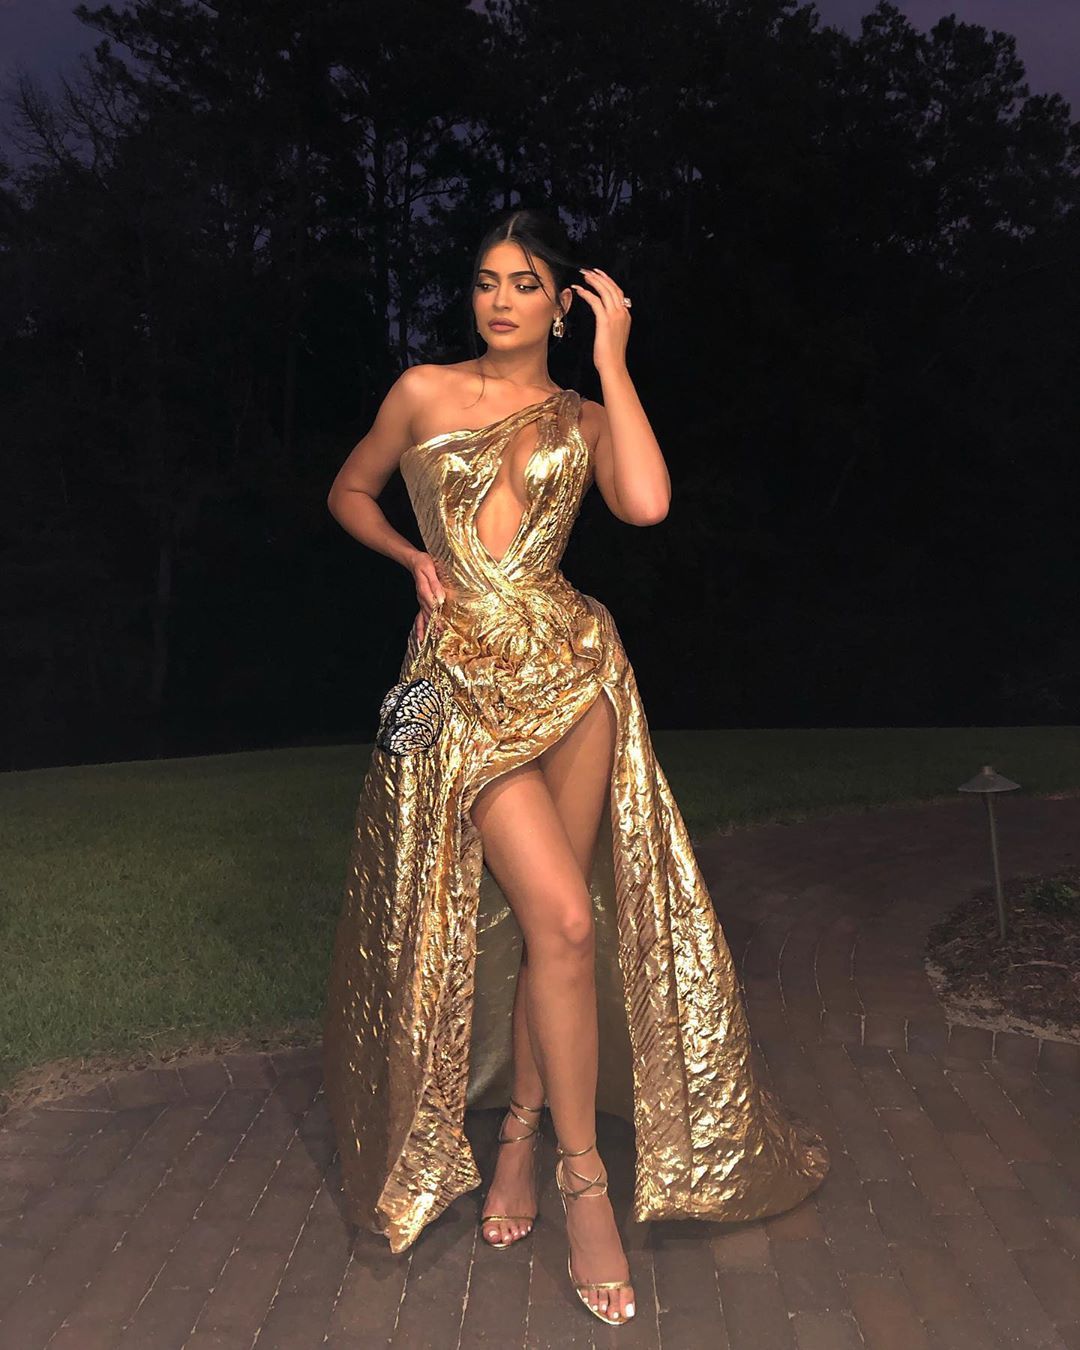 Kylie posing in gold gown